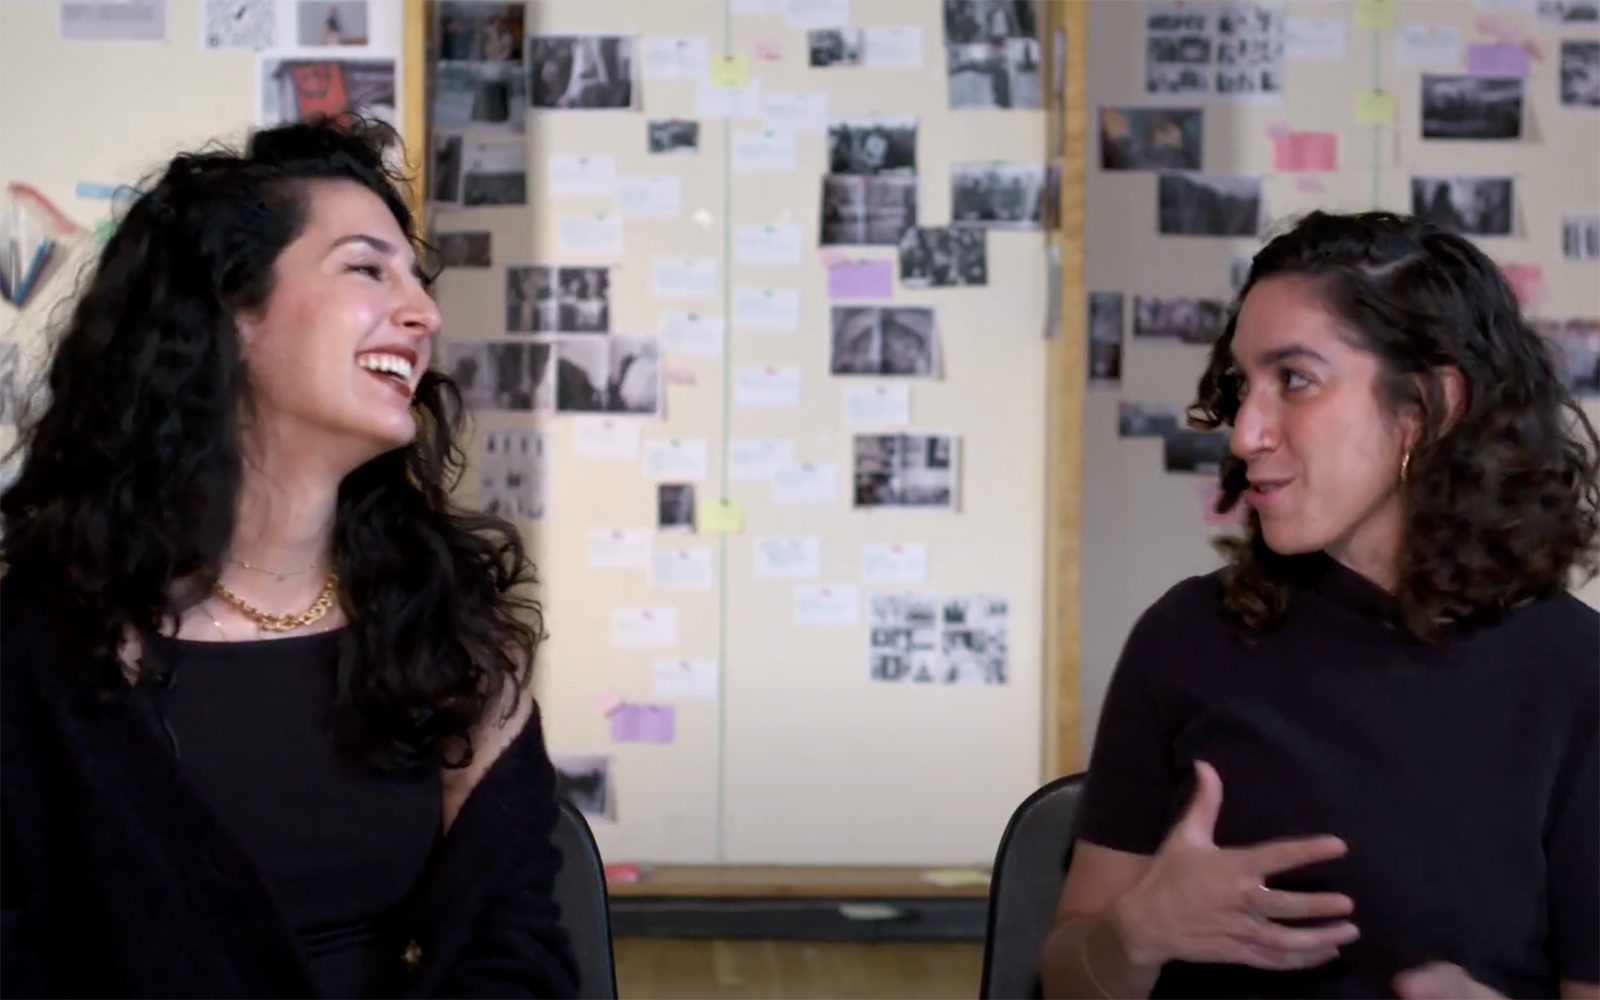 Playwright Sanaz Toossi and director Sivan Battat share their thoughts and inspirations for the play WISH YOU WERE HERE.